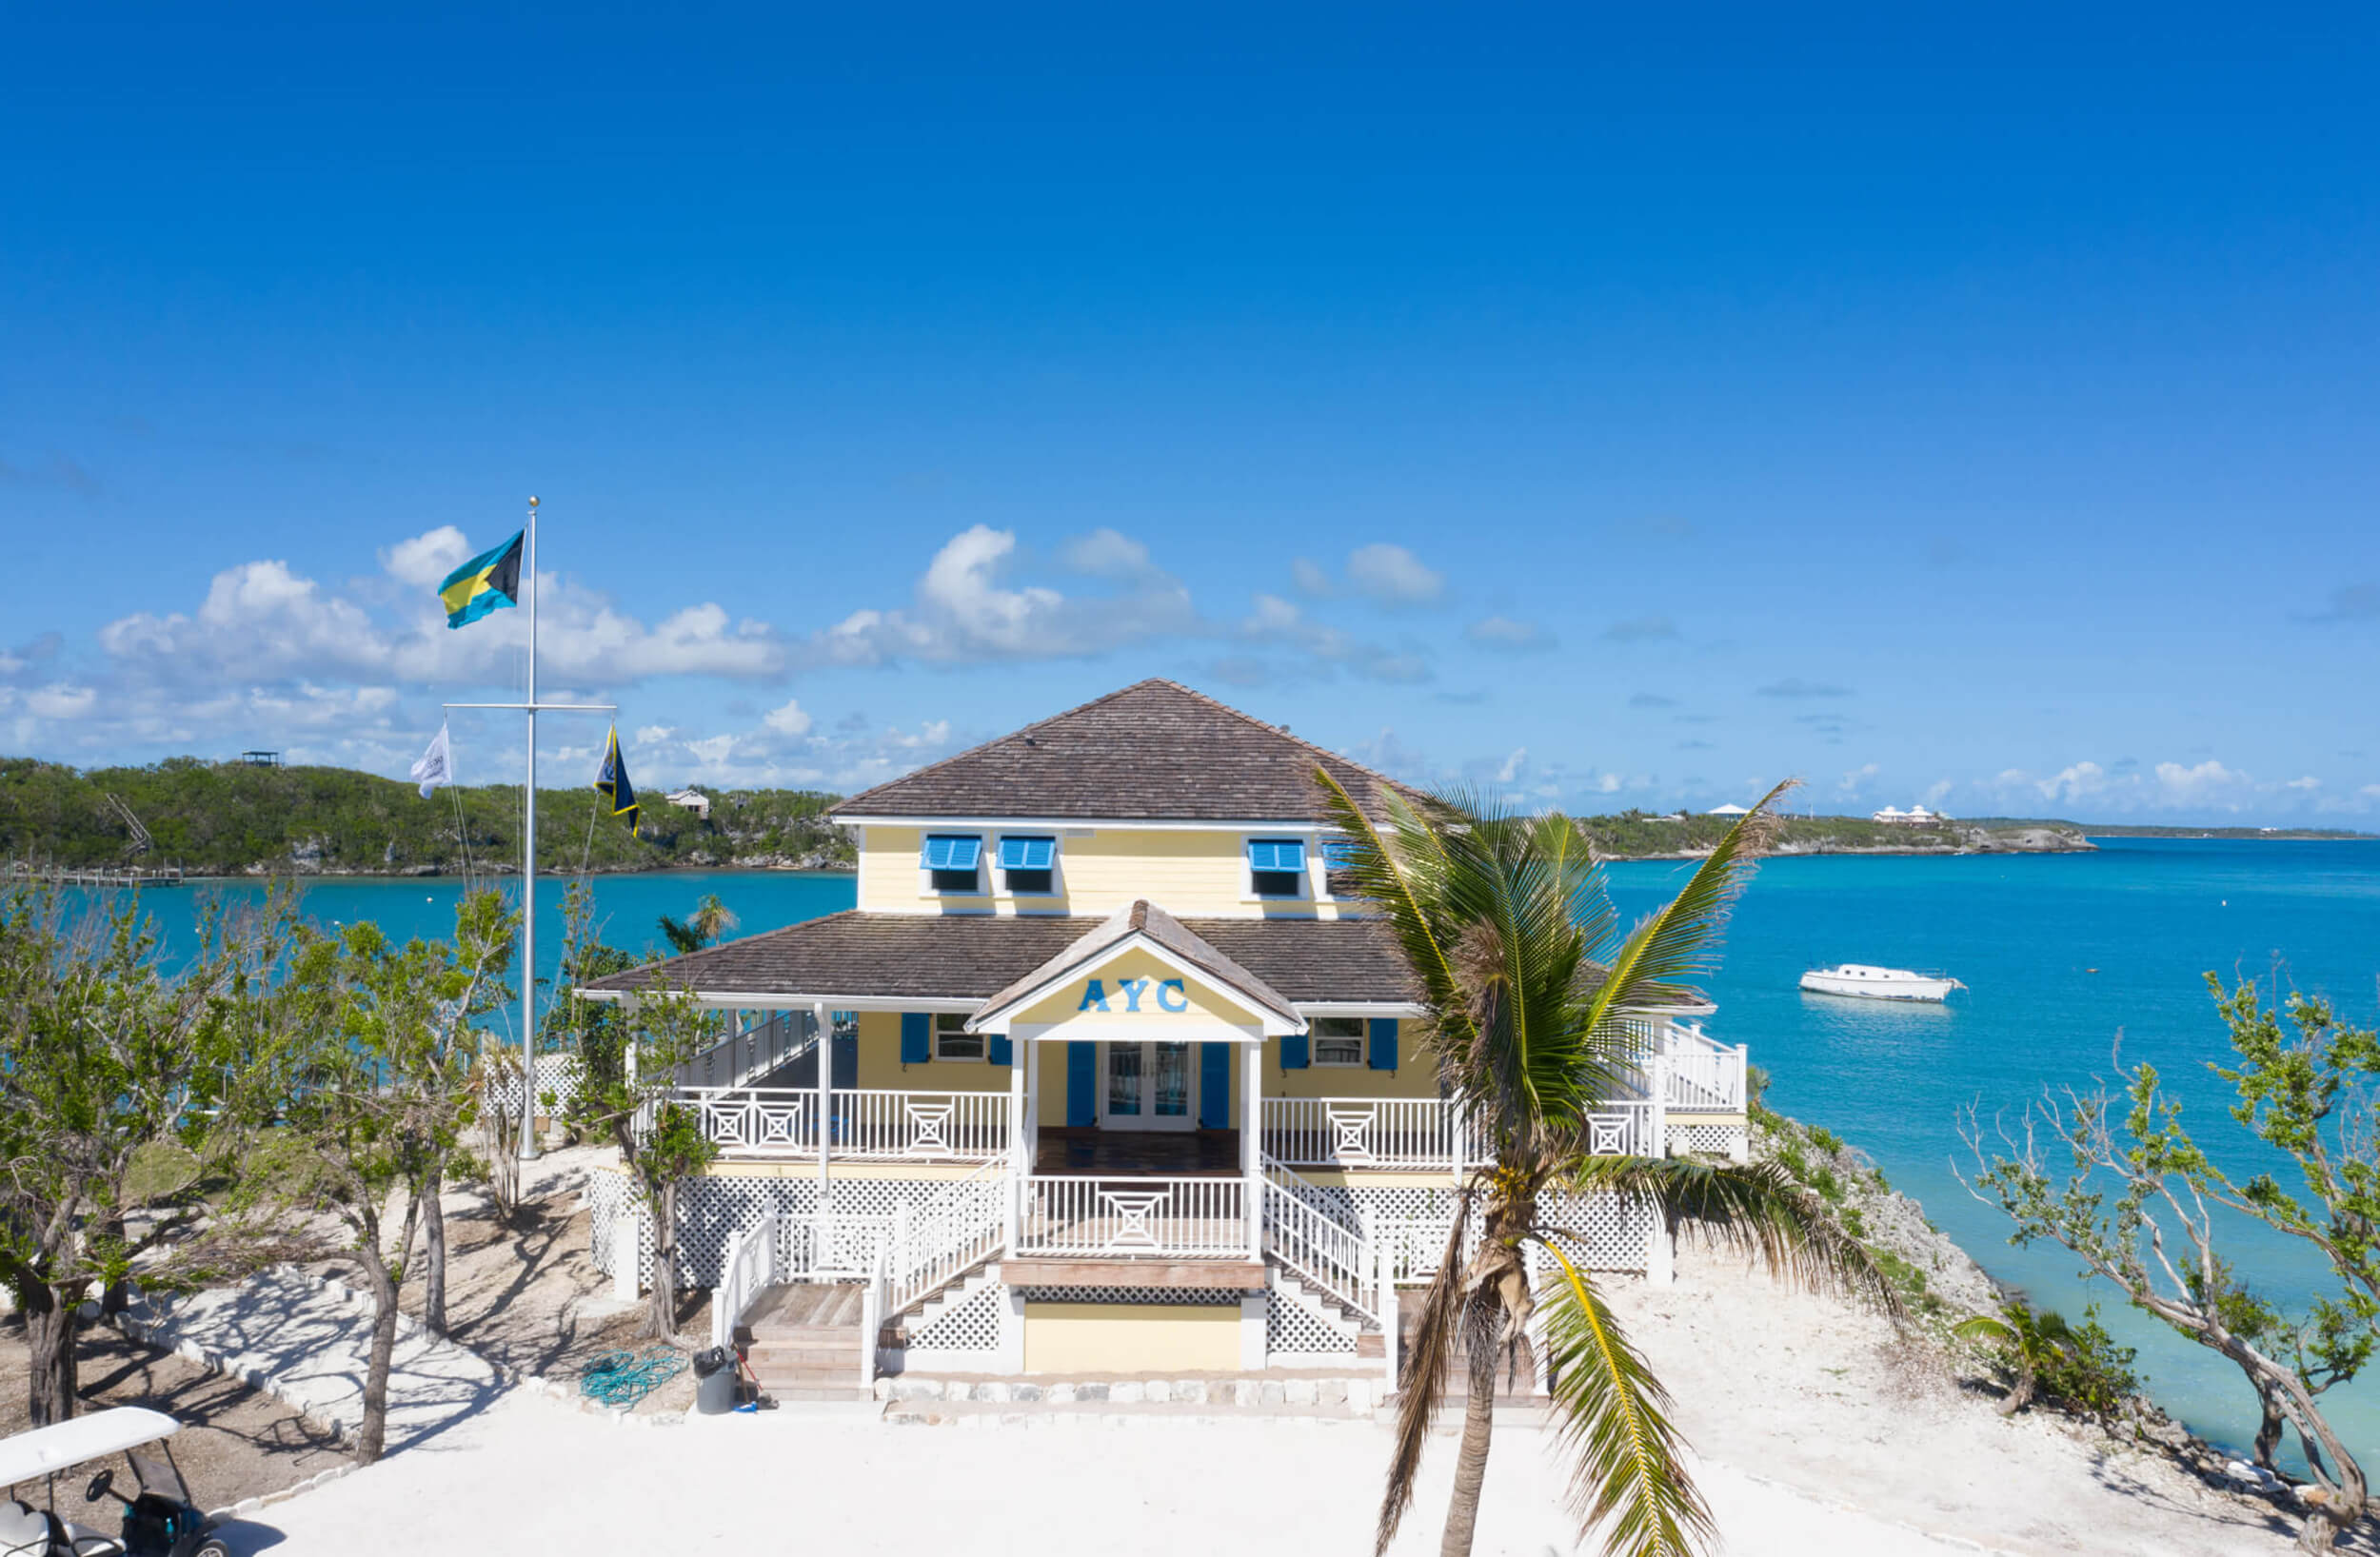 Aerial view of the Abaco yacht club against the backdrop of the crystal-clear Bahamian waters, epitomizing exclusive club lifestyle.